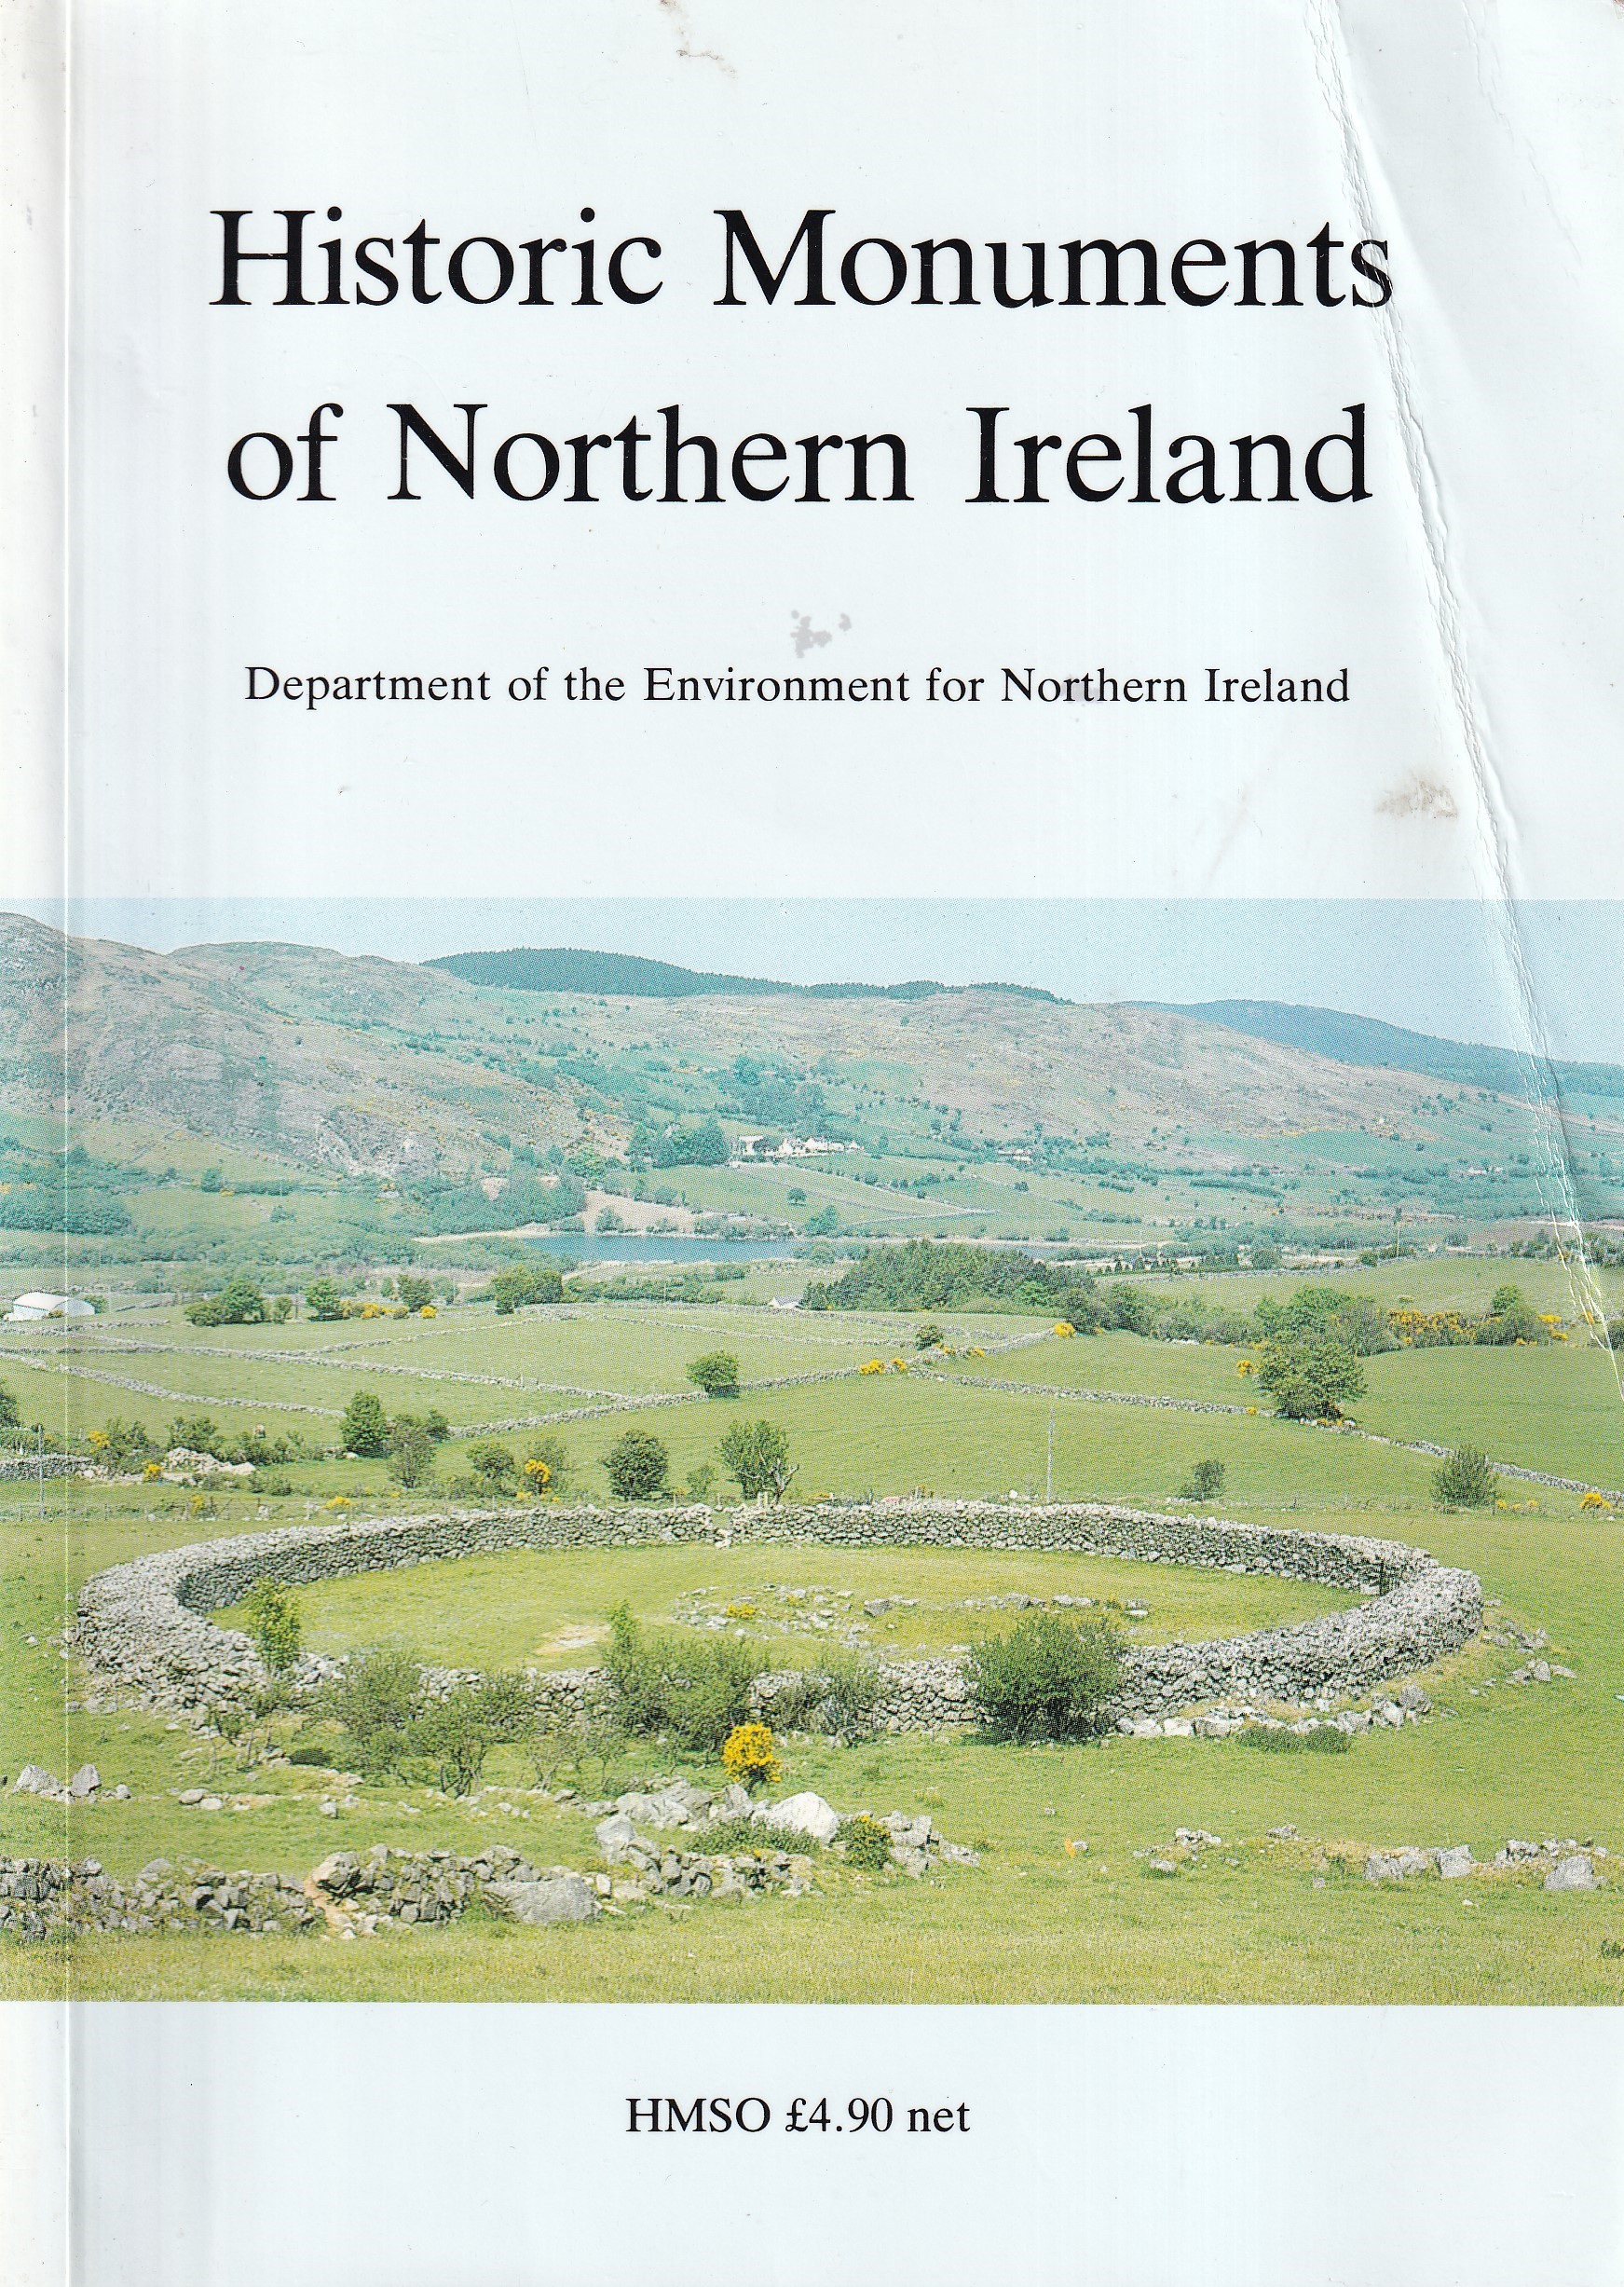 Historic Monuments of Northern Ireland: Department of the Environment for Northern Ireland |  | Charlie Byrne's